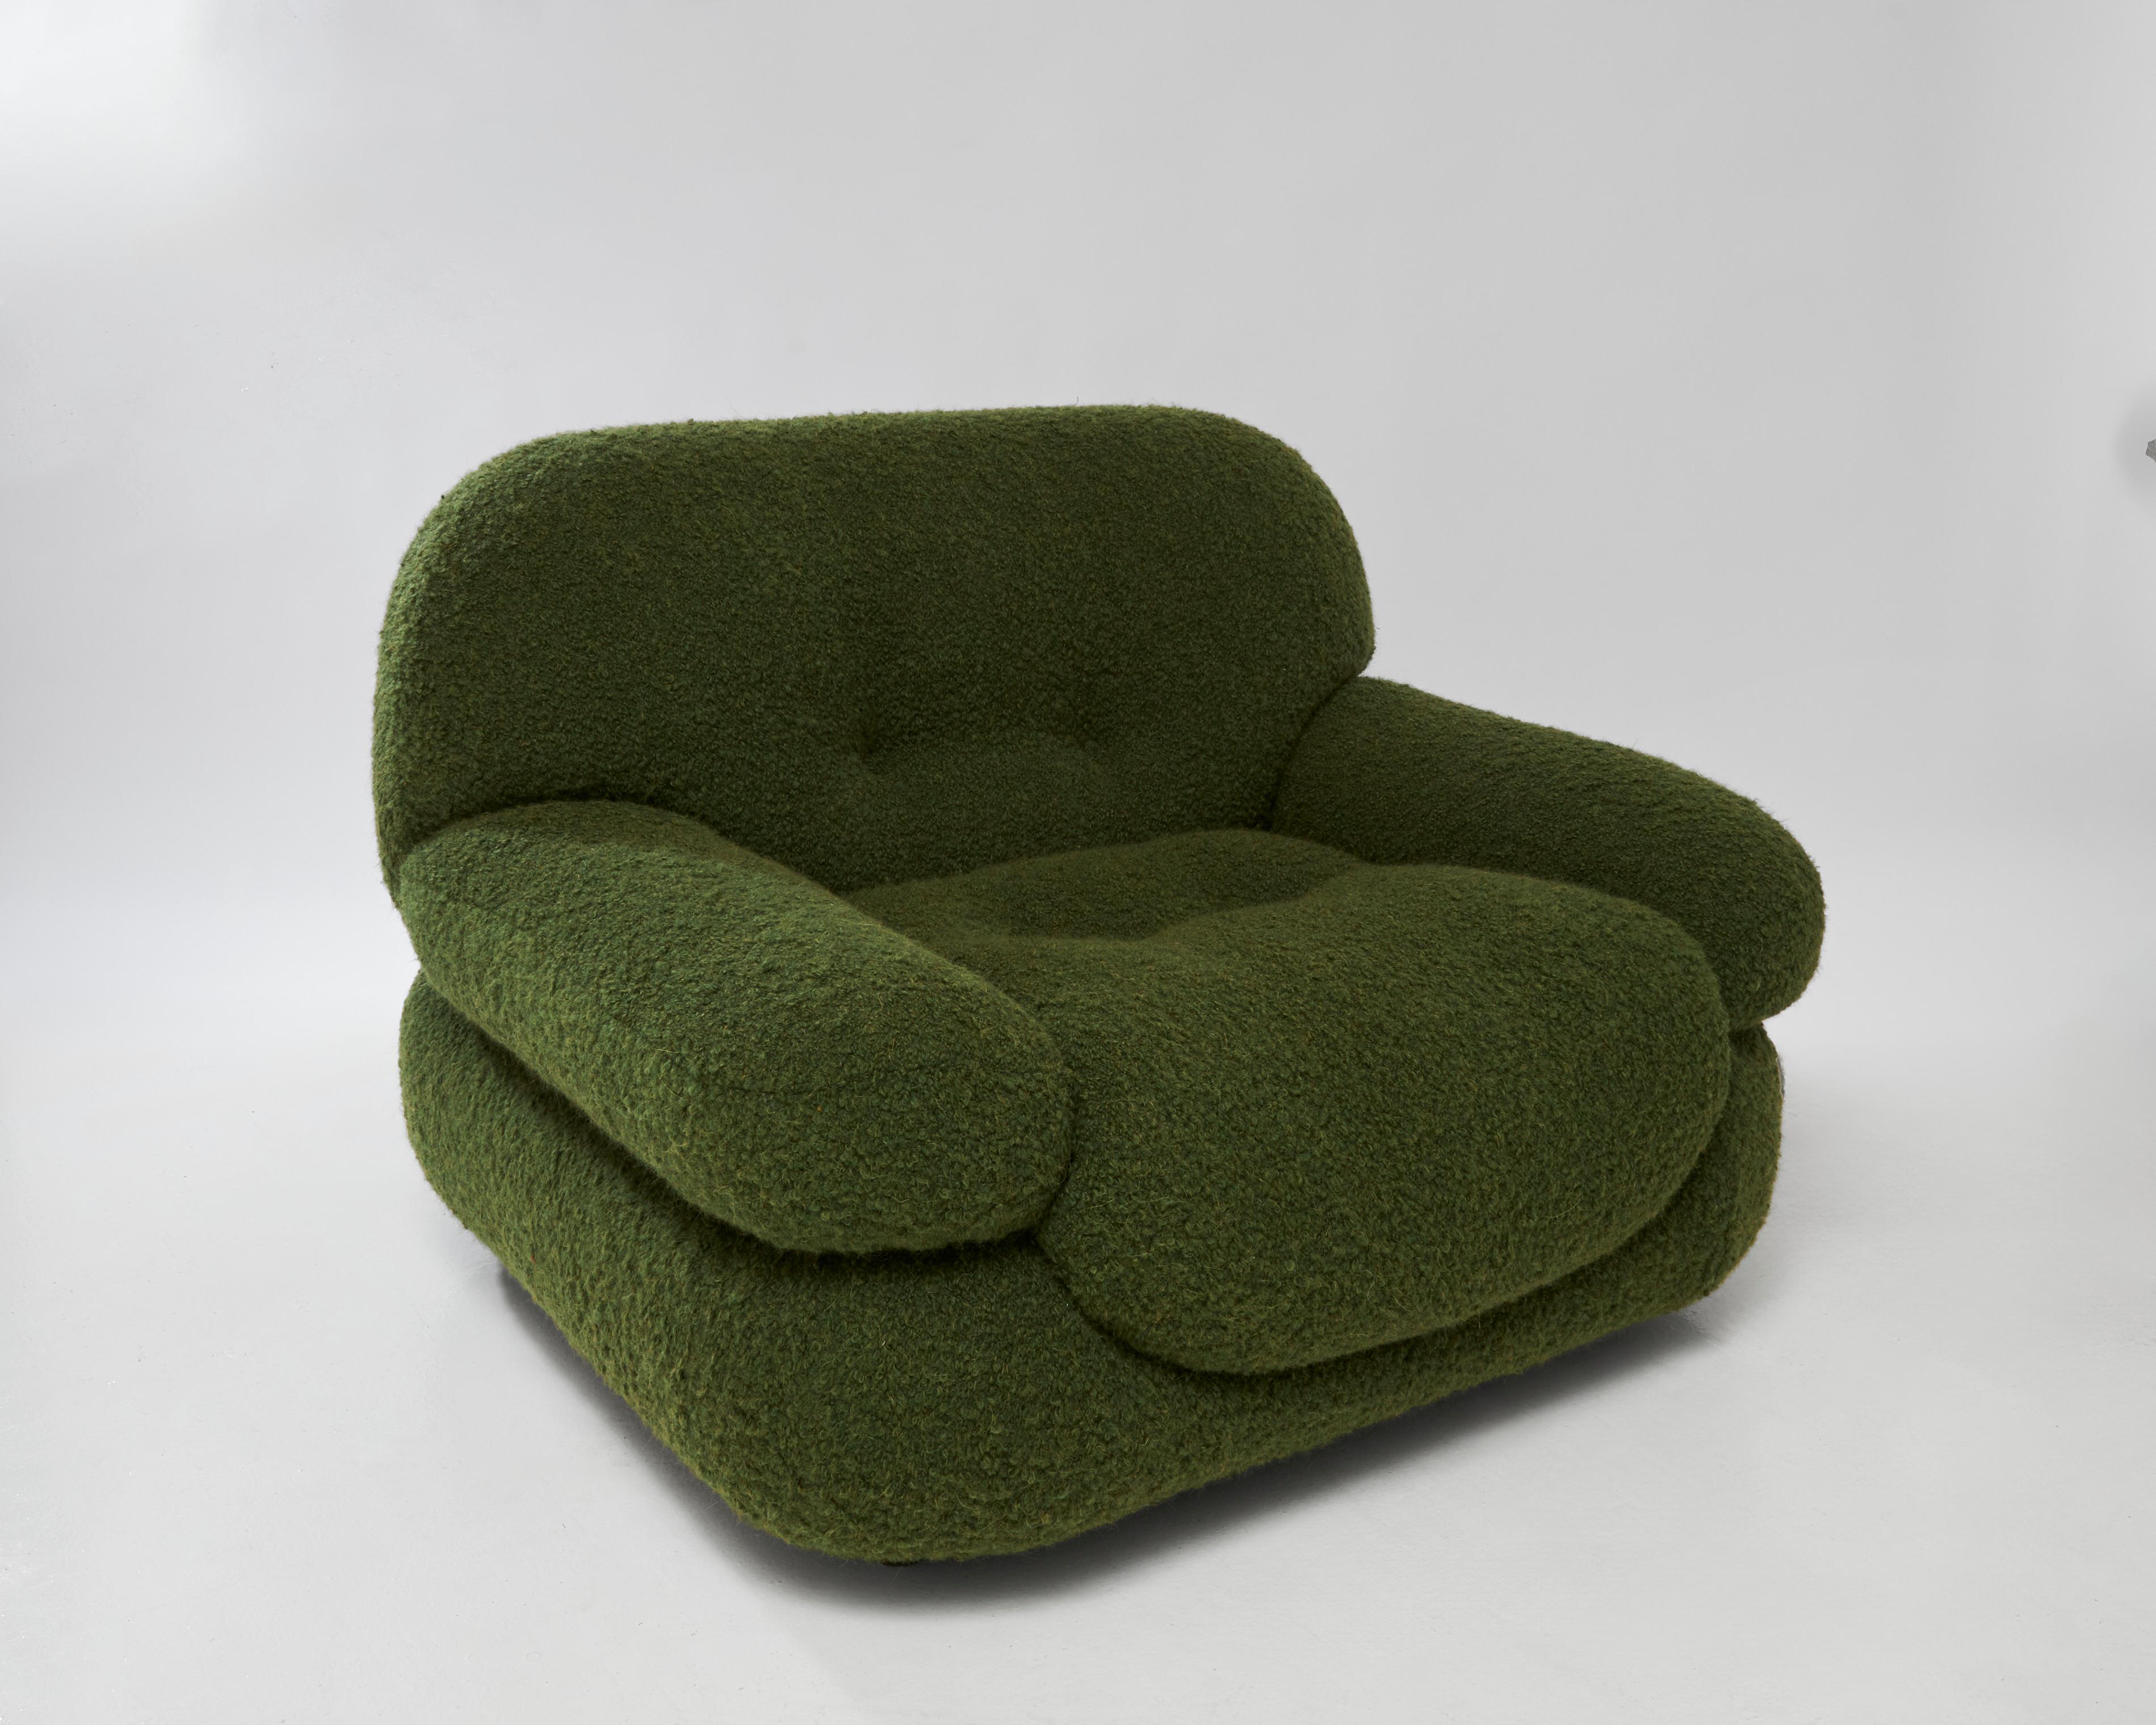 A spacious and comfortable armchair designed by Sapporo for Mobil Girgi in Italy during the 1970s. This large and stylish chair boasts fluffy cushions and inviting round shapes that beckon you to sit back and unwind. Designed with comfort in mind,